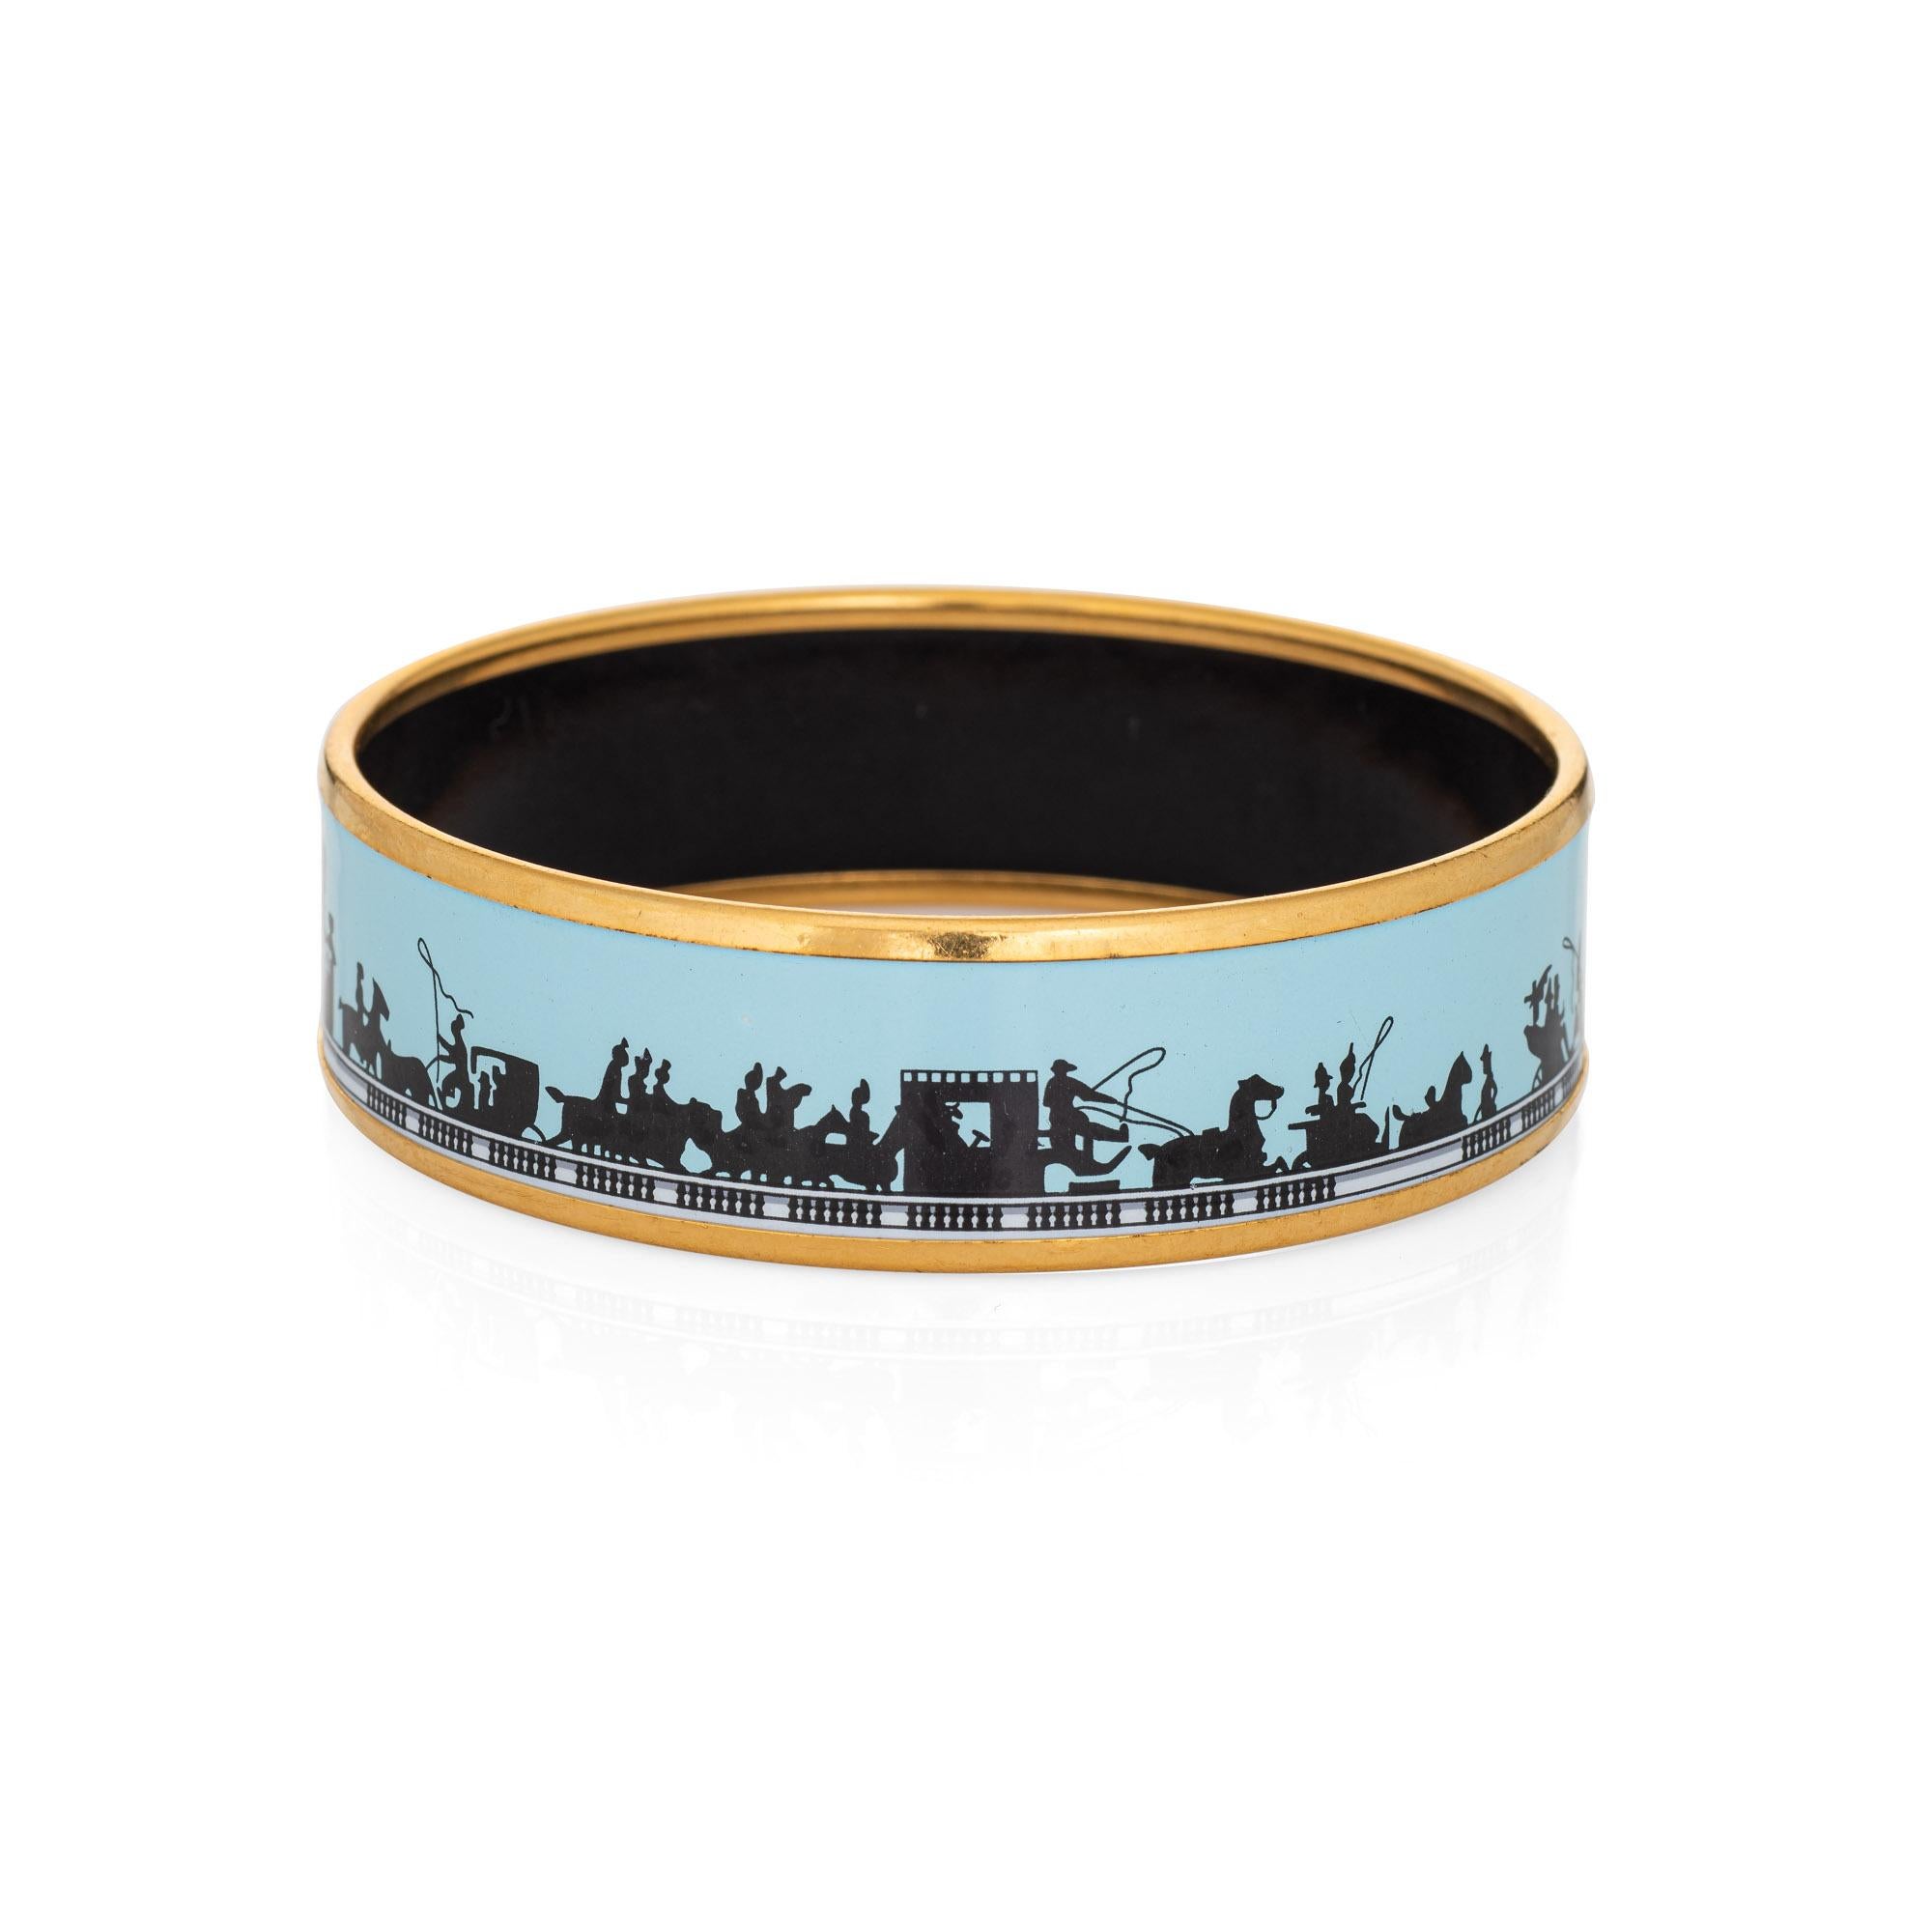 Overview:

Pre-owned vintage Hermes enamel bracelet with a Horse & Carriage pattern set against a light powder blue backdrop, with yellow gold plated hardware.

The wide 0.70